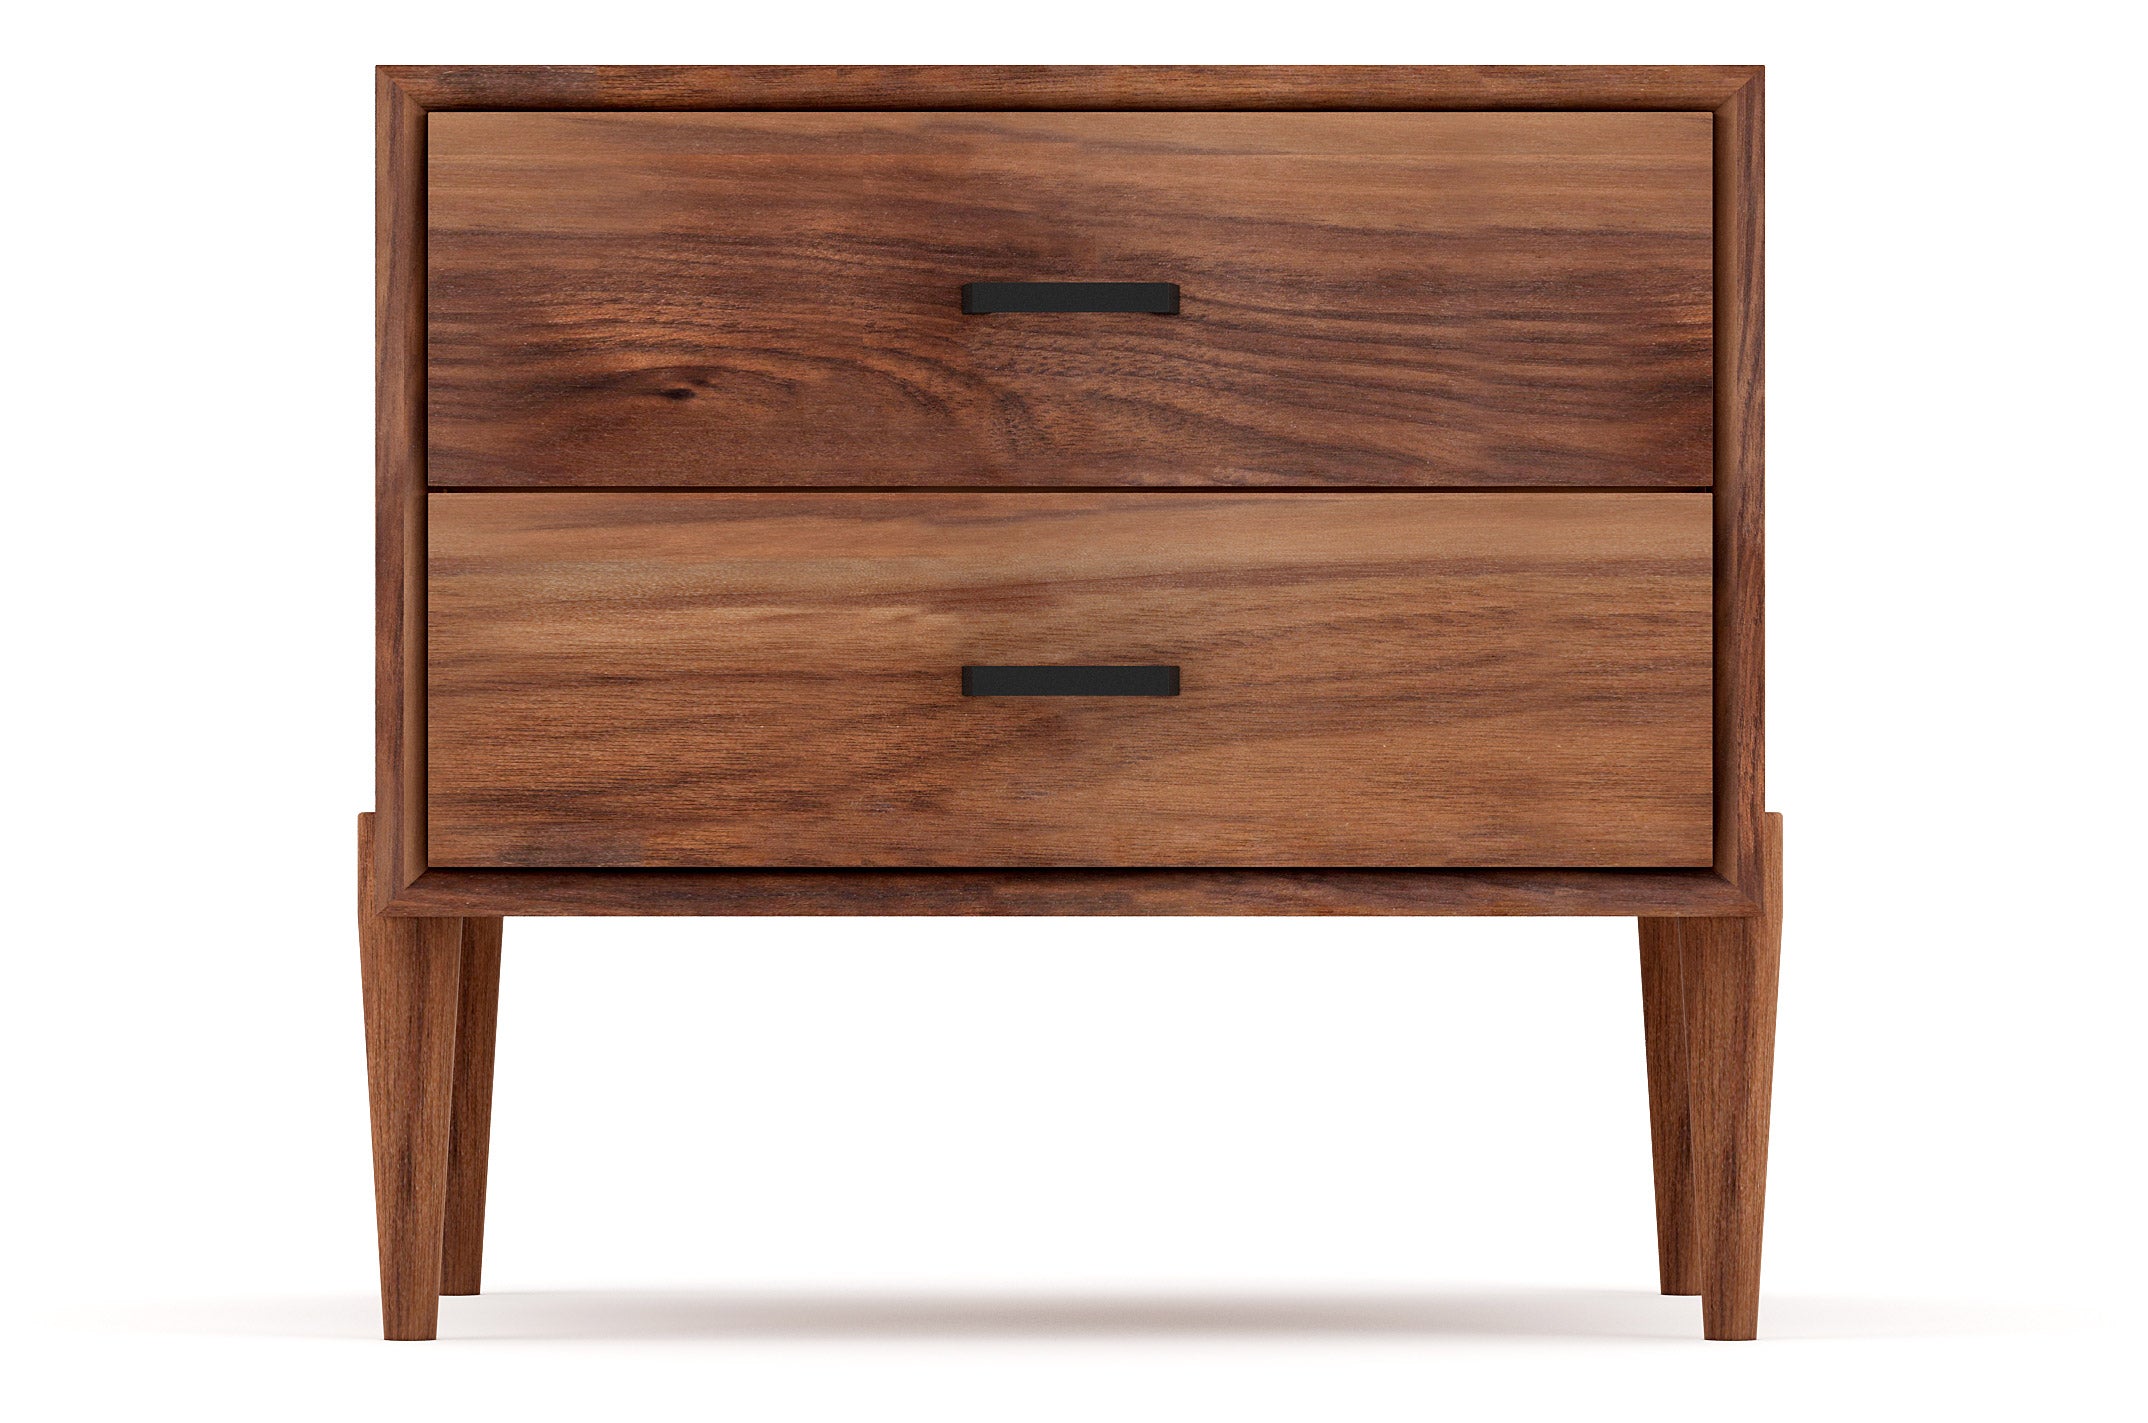 Shown in walnut with black pulls